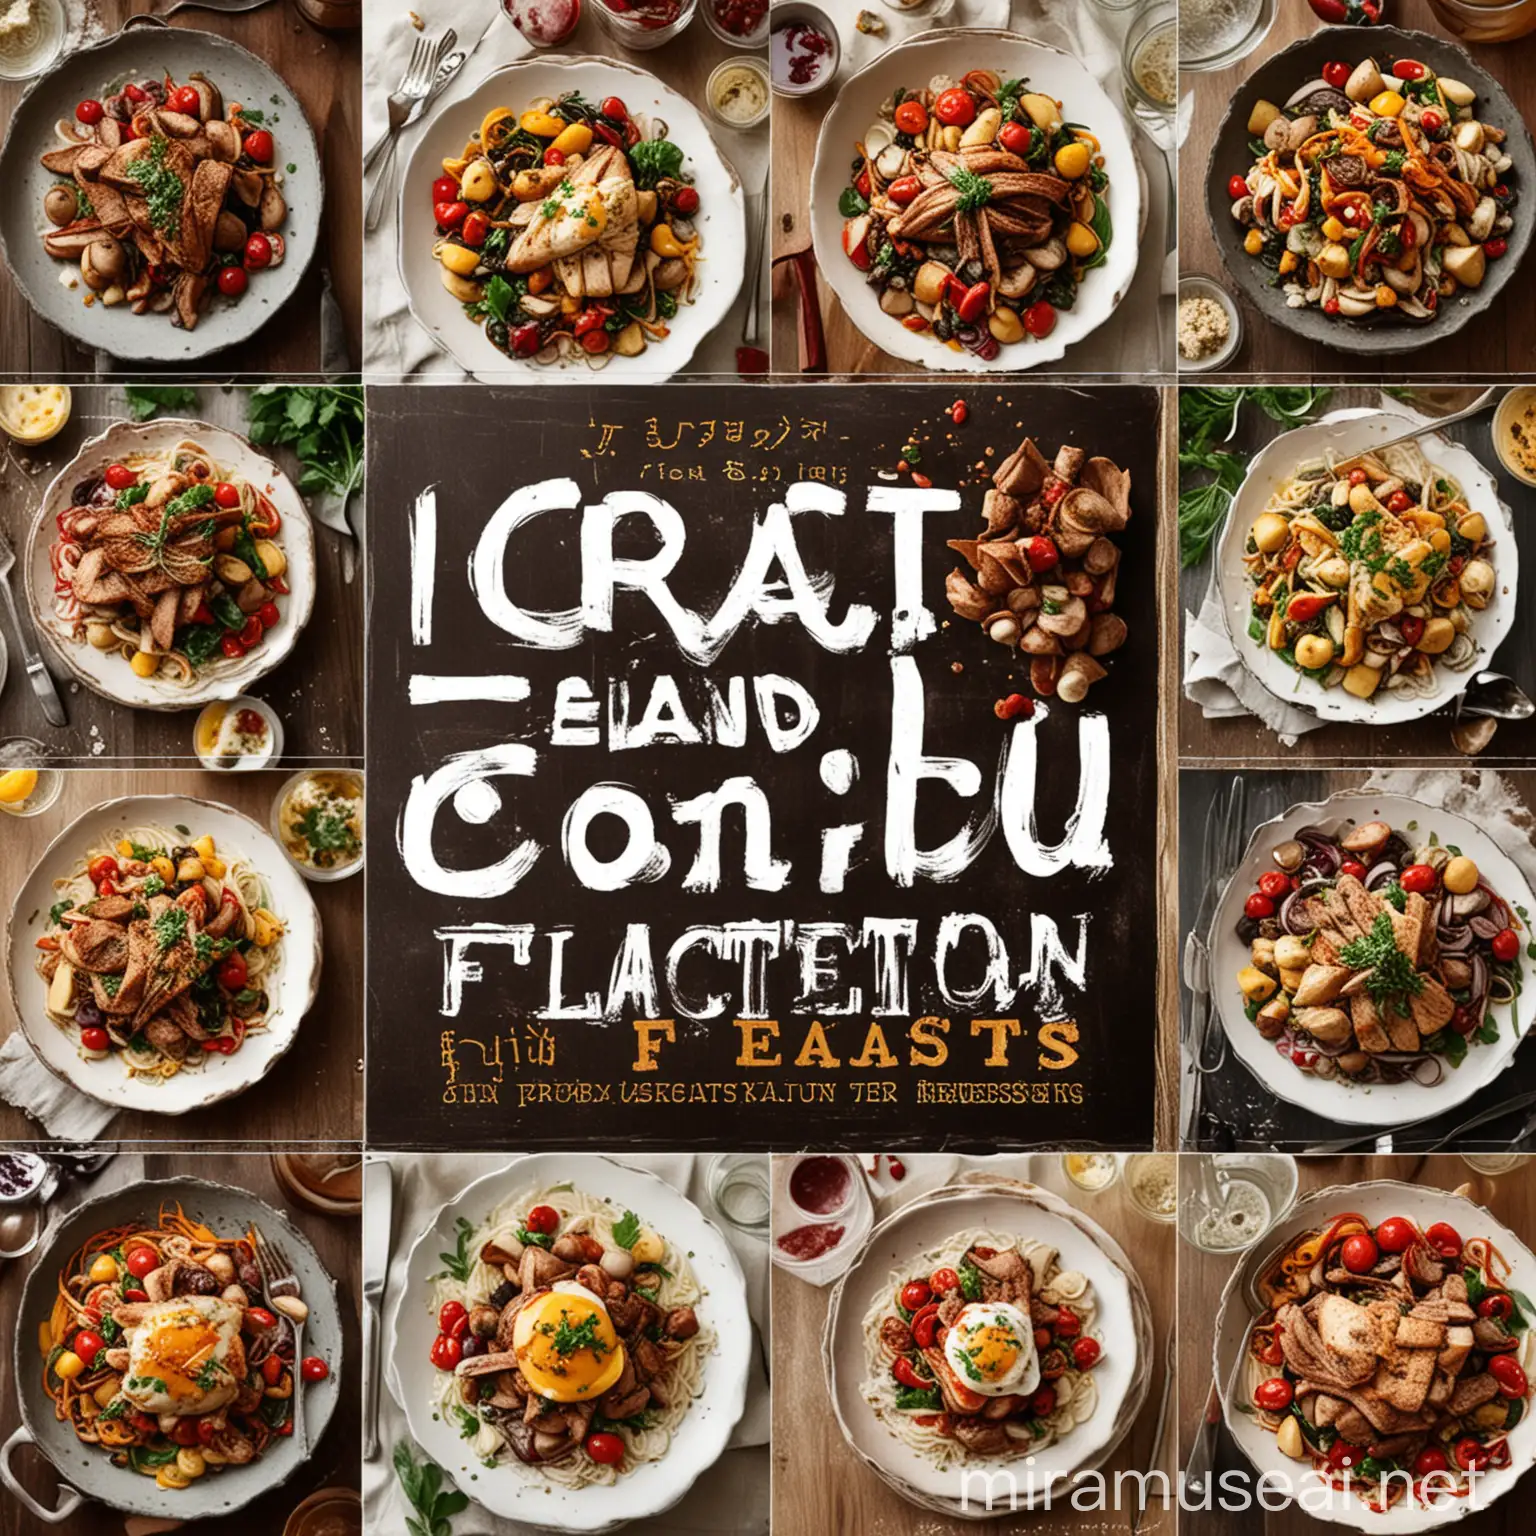 Create an image with the caption “Flavorful Feasts” and add professional cooking photos